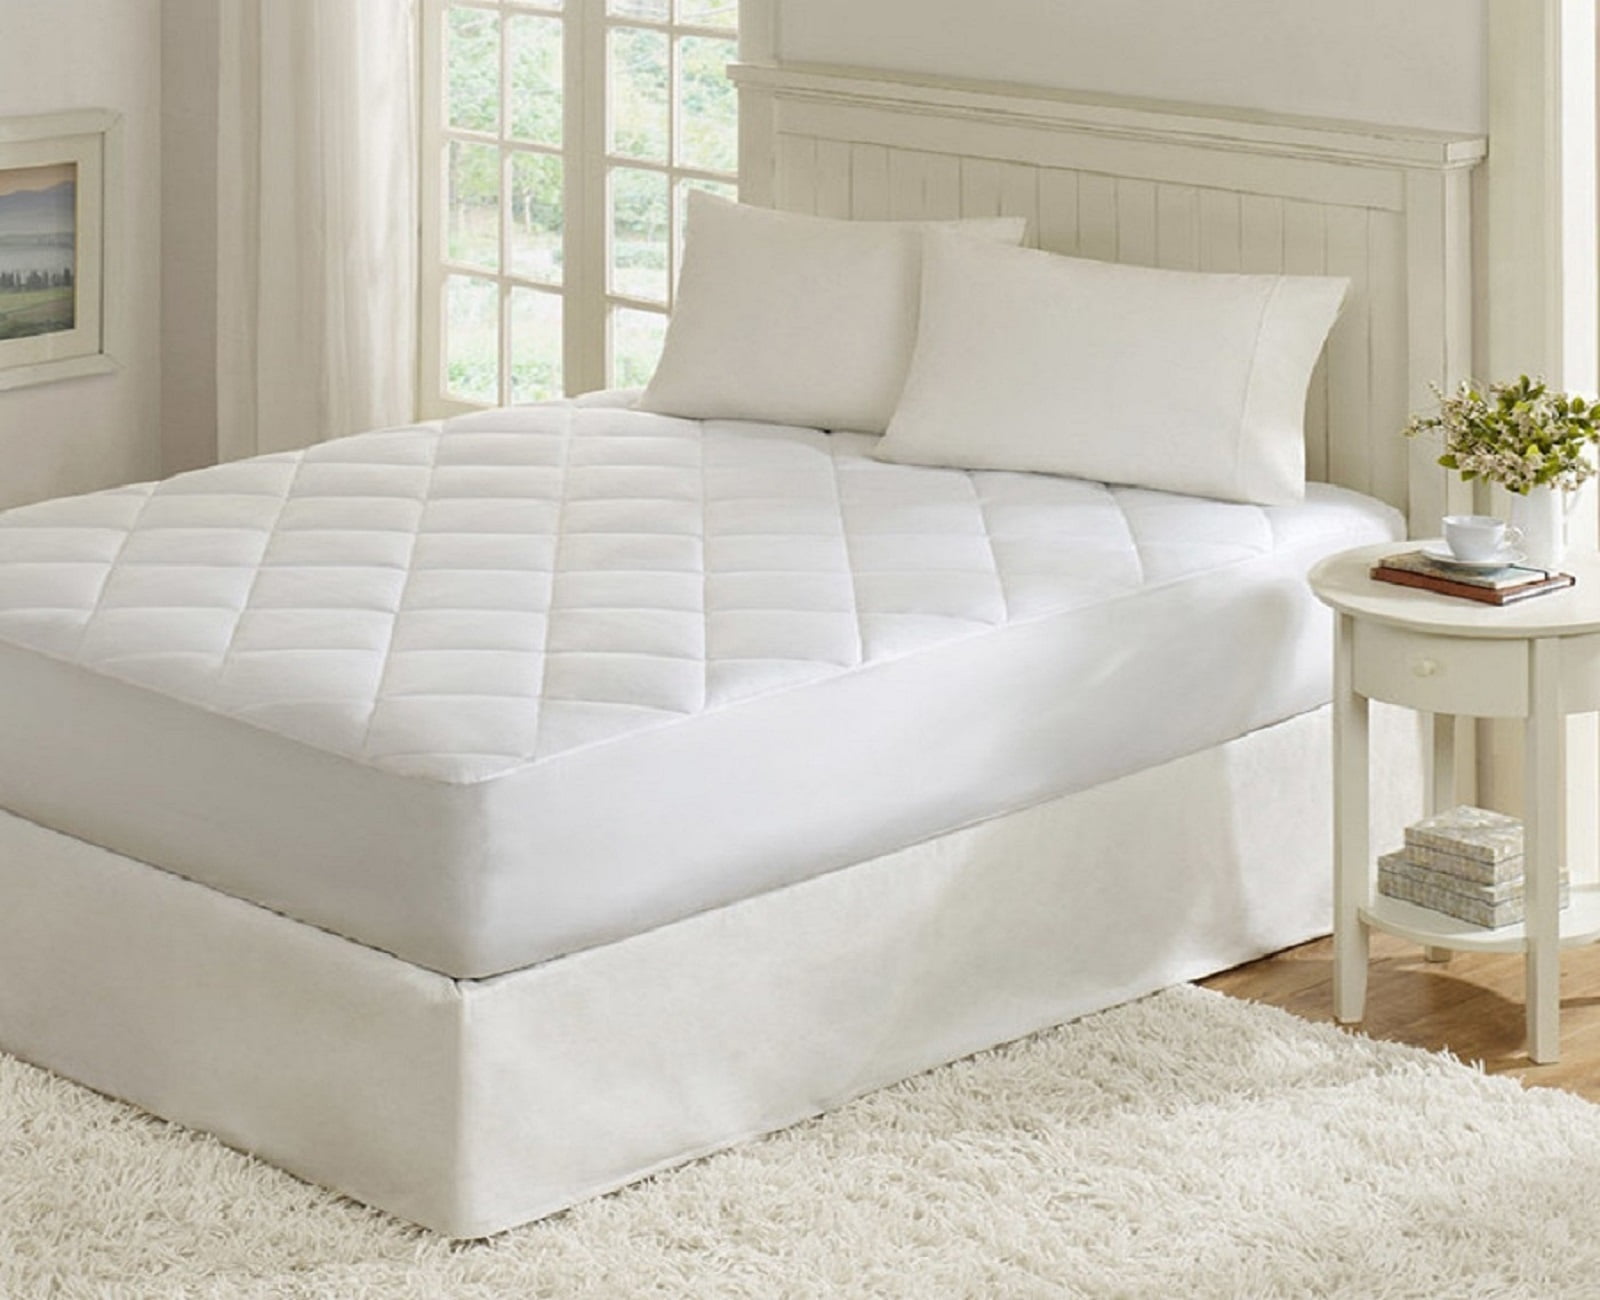 queen size mattress protector for transport